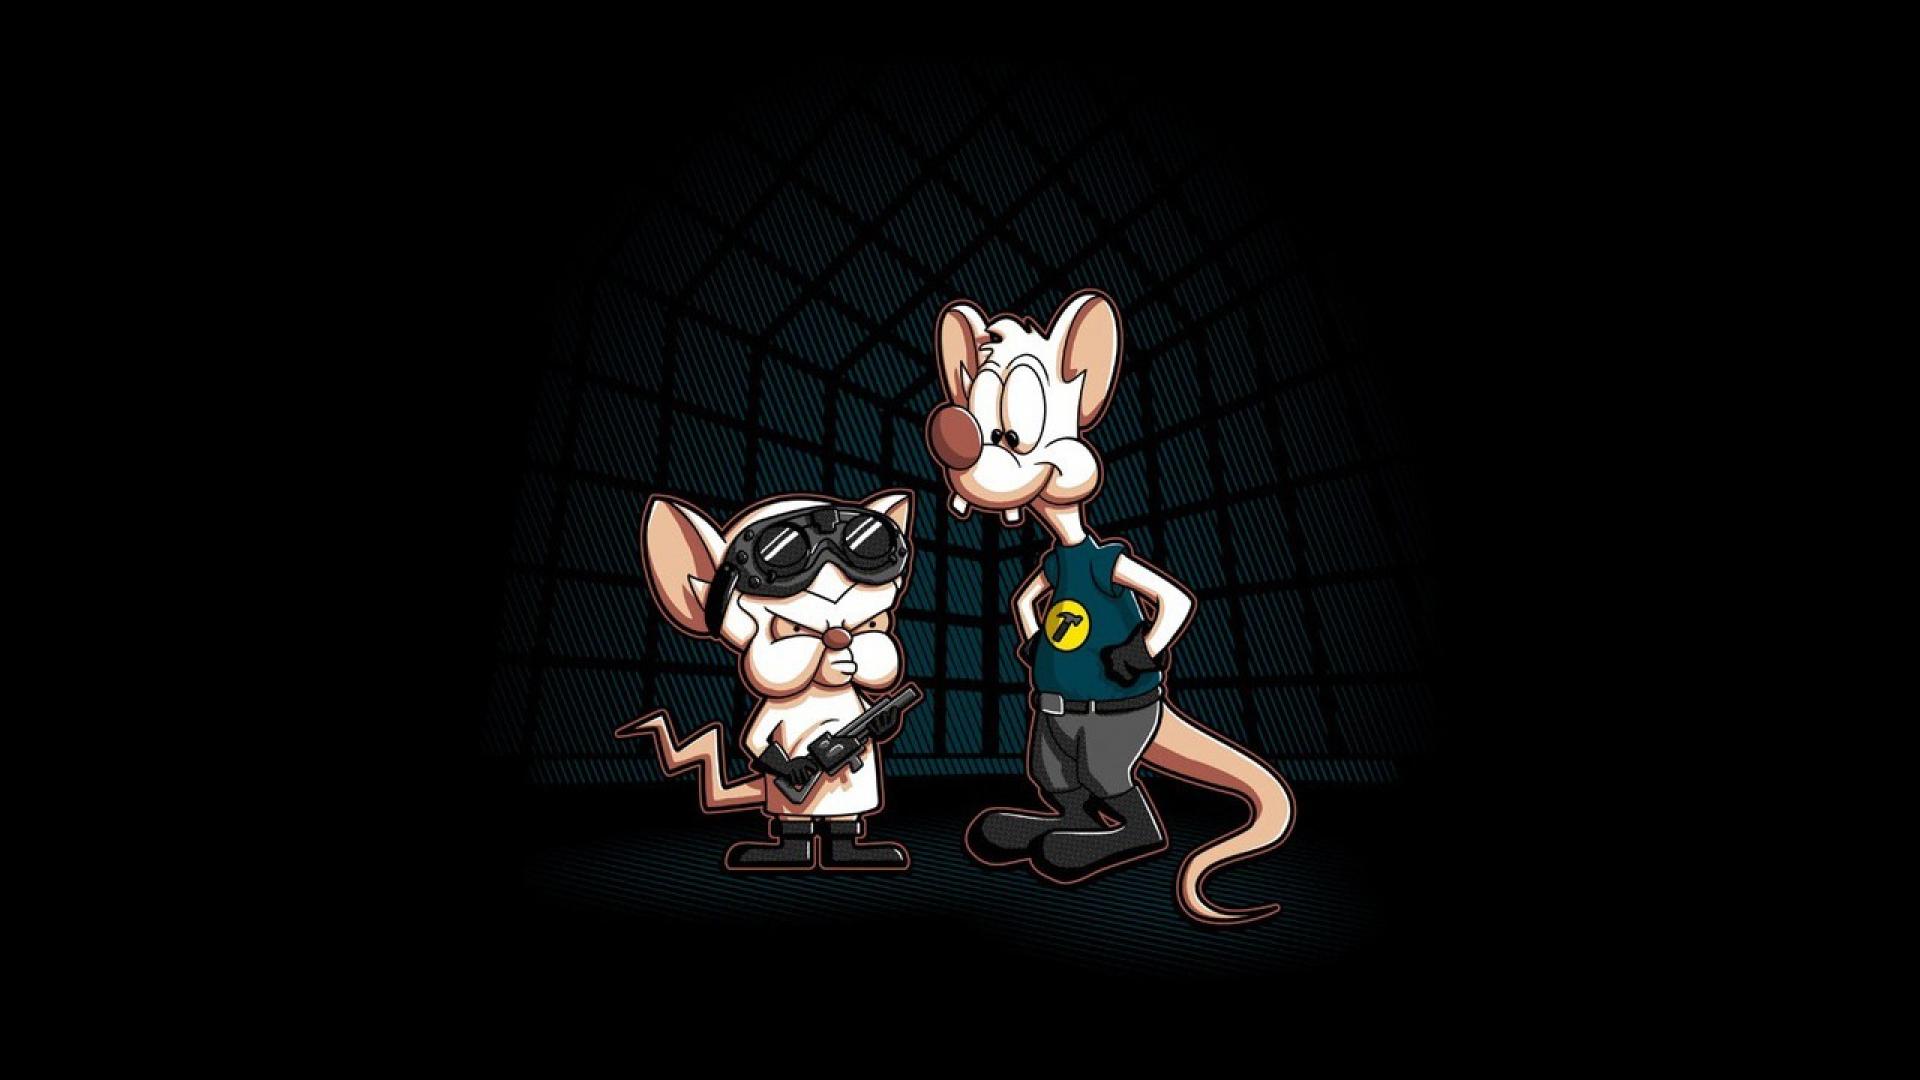 1920x1080px Pinky and the Brain Wallpaper